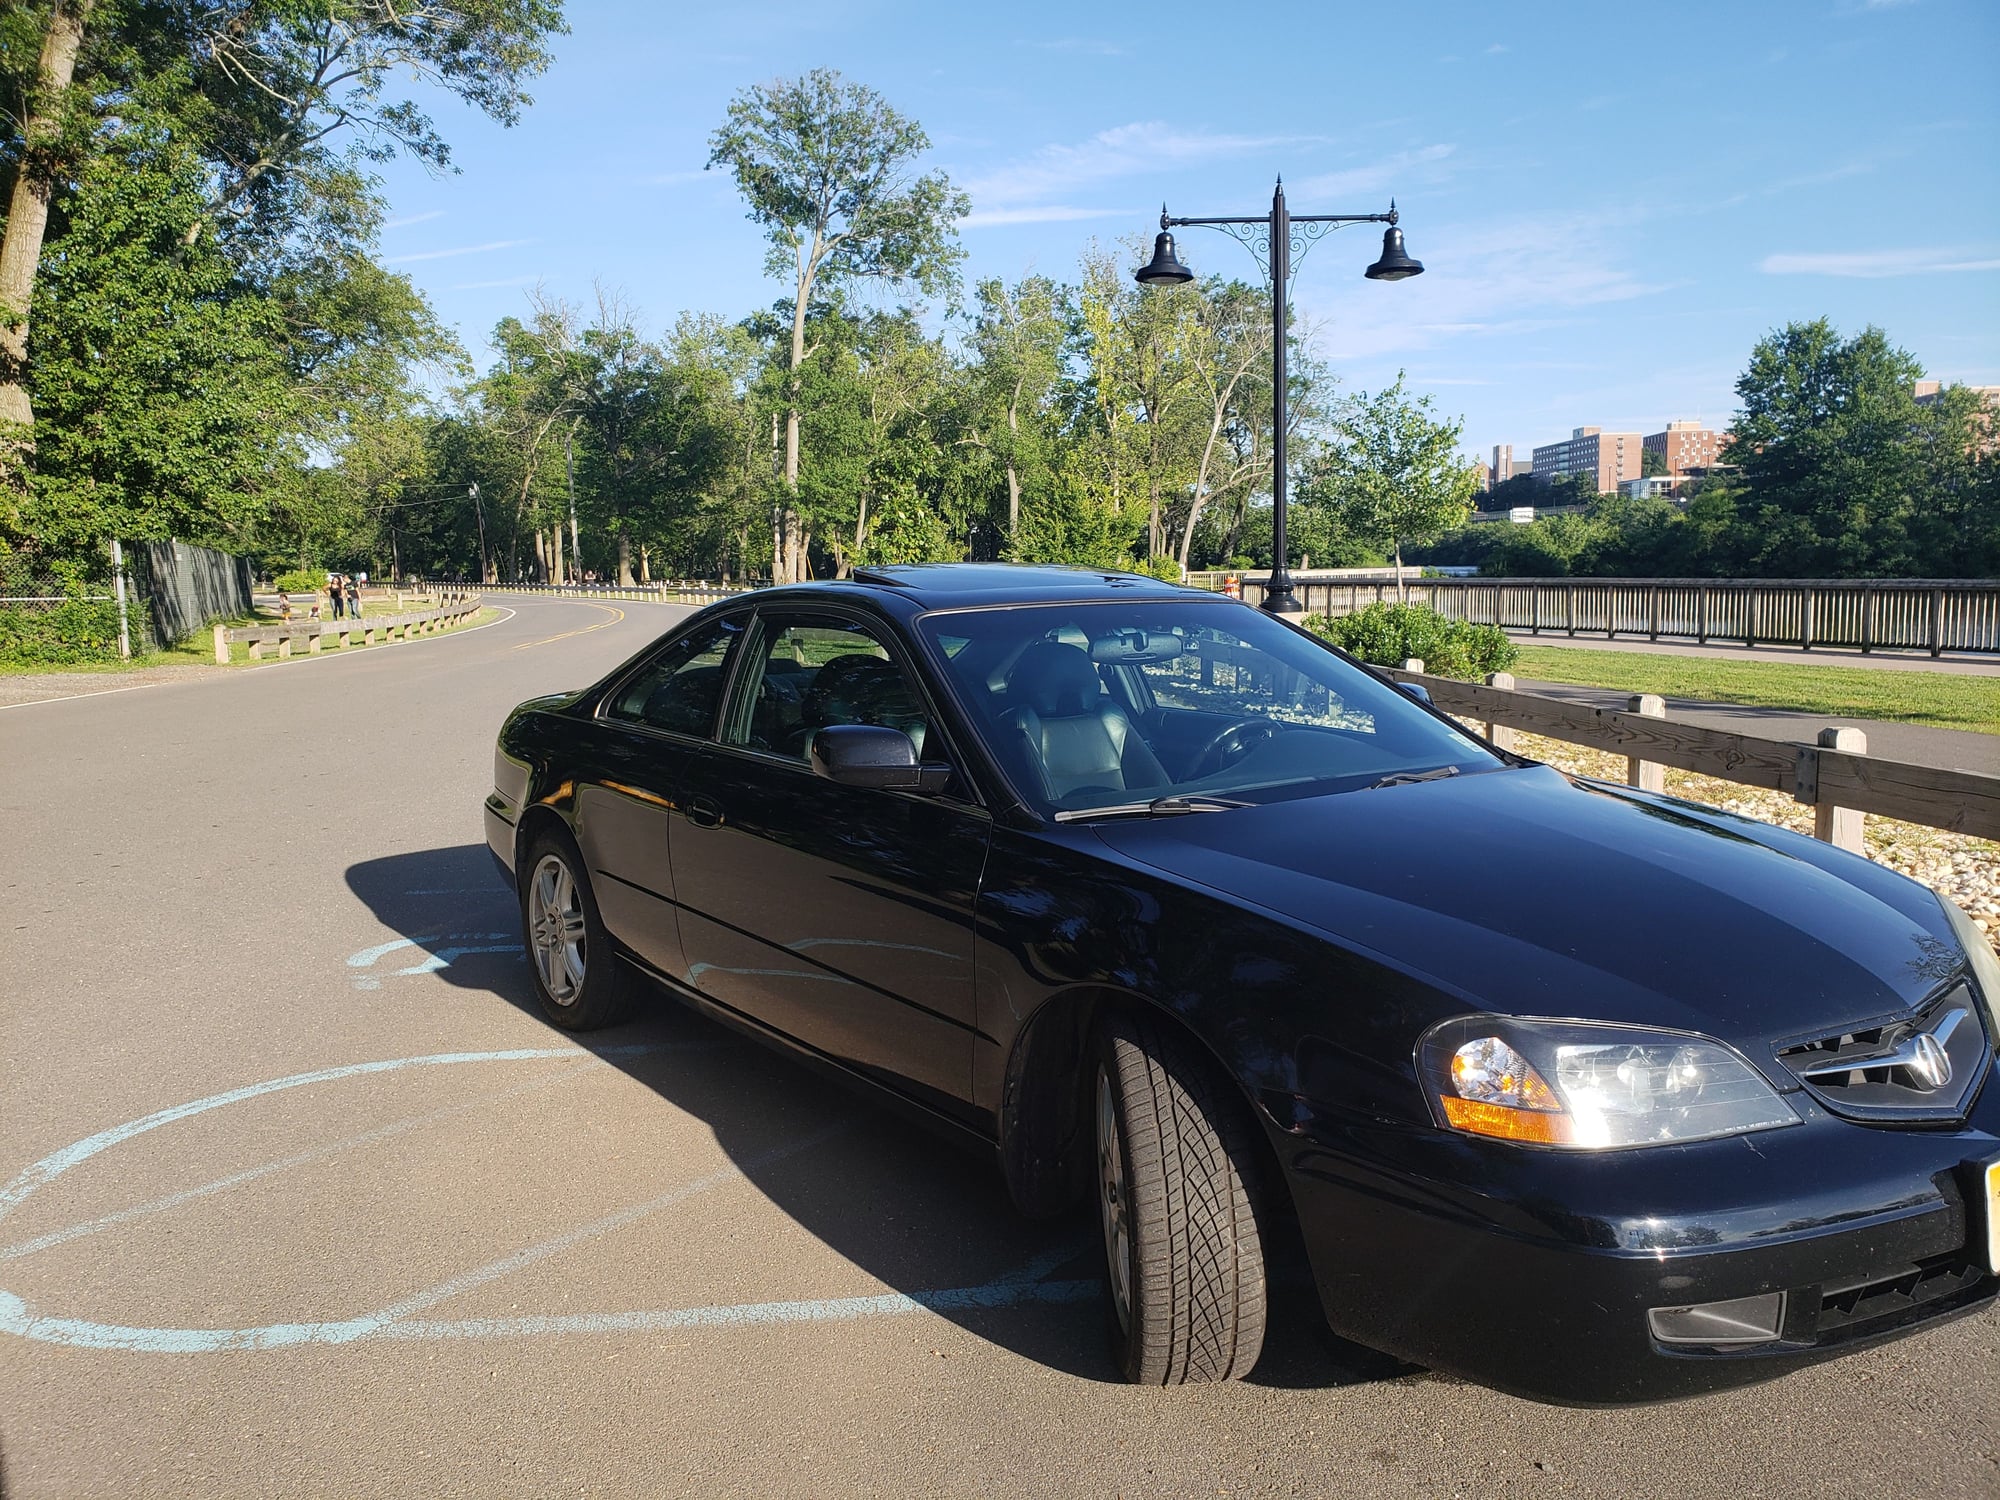 2003 Acura CL - EXPIRED: 2003 Acura CL Type-S AT-5 191k miles - Used - VIN 19uya42663a009178 - 191,800 Miles - 6 cyl - 2WD - Automatic - Coupe - Black - Highland Park, NJ 08904, United States